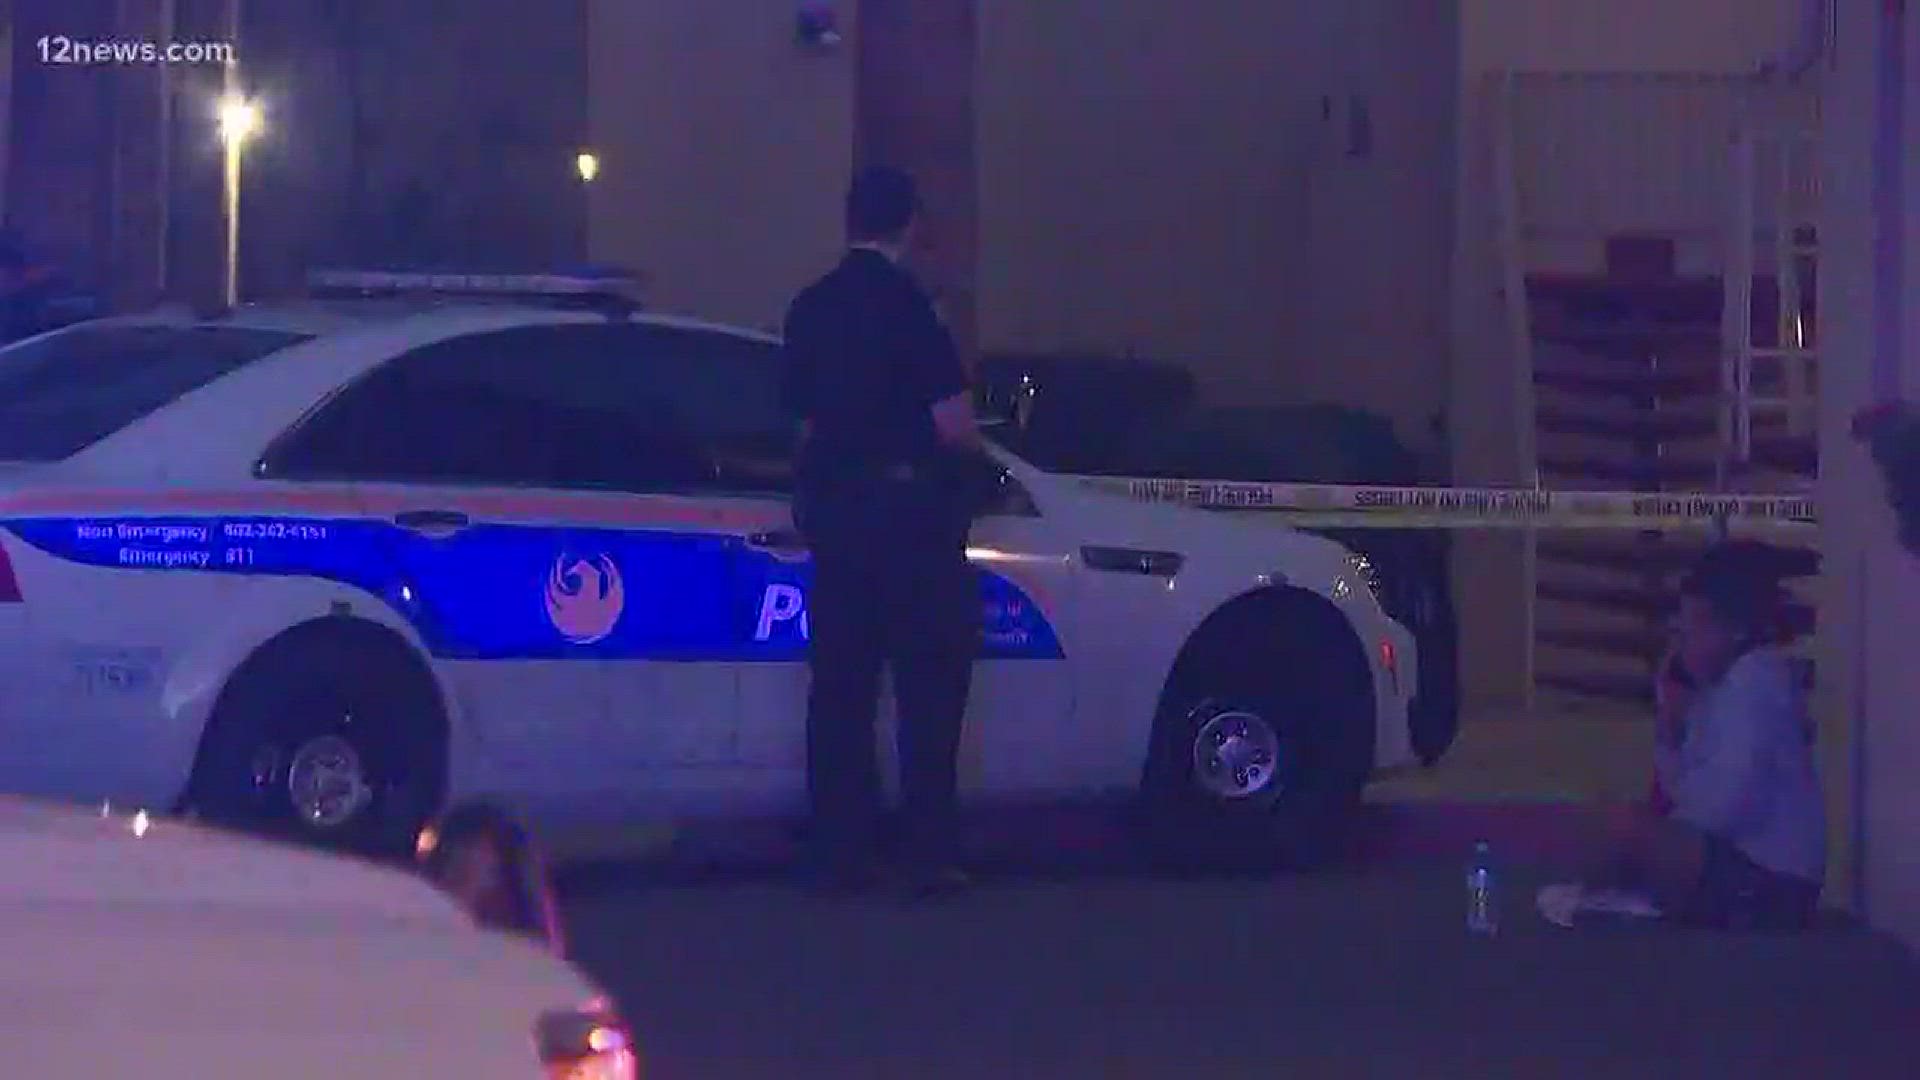 A 4-year-old boy was shot near 19th Avenue and Cactus Road, according to Phoenix police.